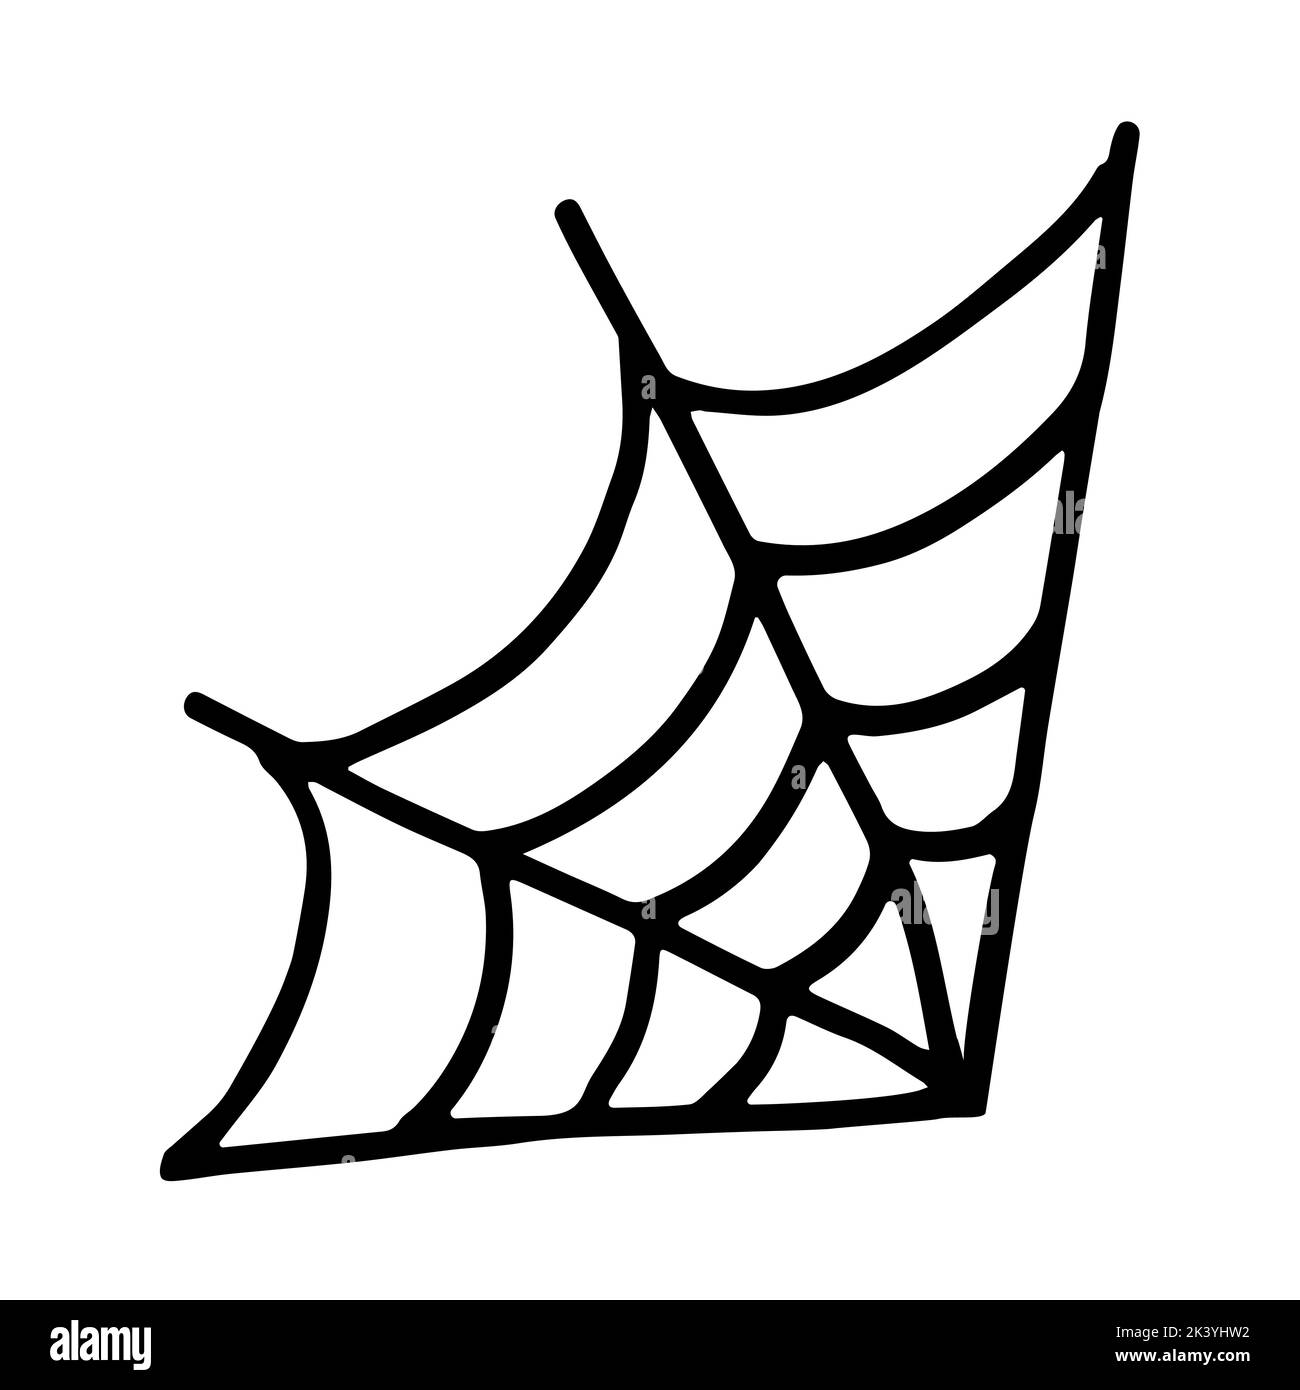 Doodle image of a black web. Vector illustration Stock Vector